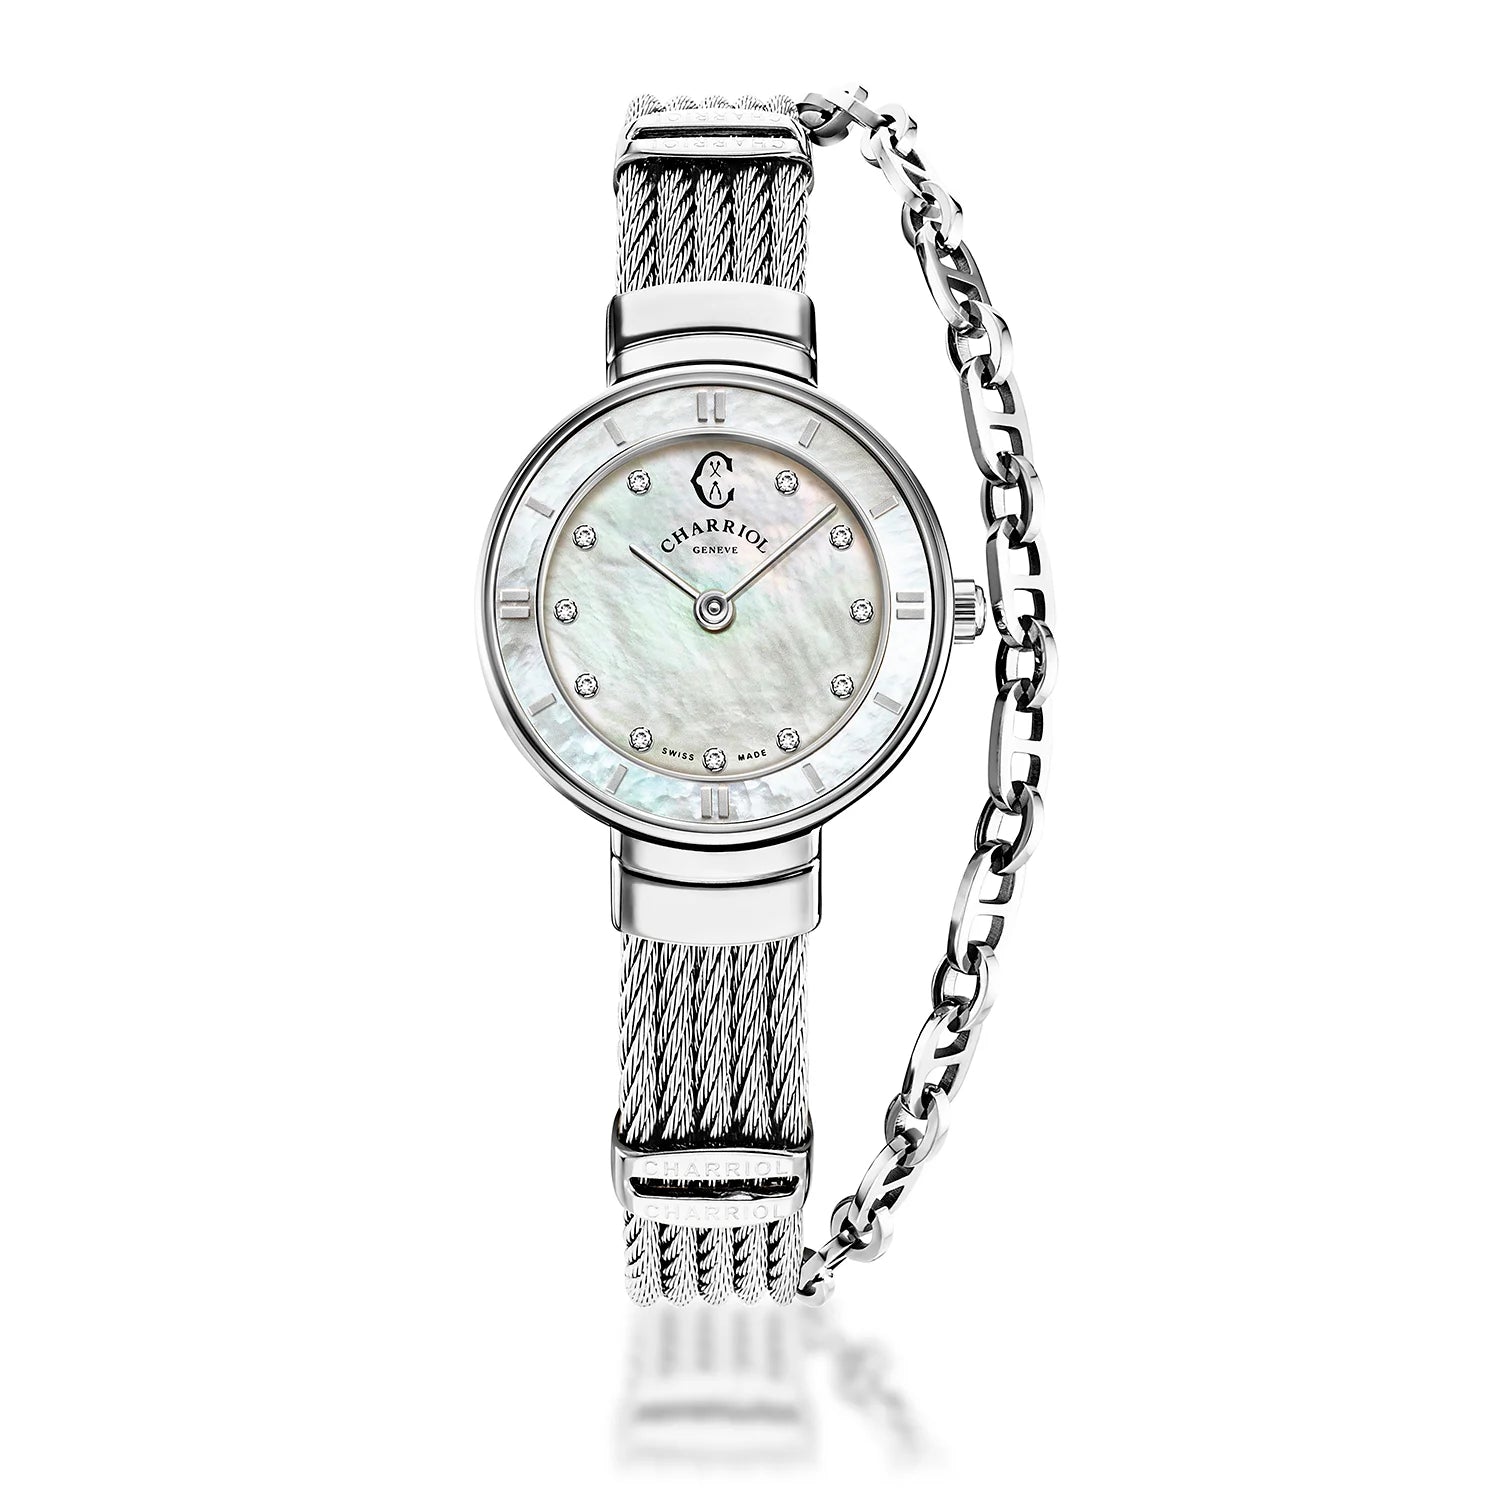 ST TROPEZ, 25MM, QUARTZ CALIBRE, MOTHER-OF-PEARL WITH 11 DIAMONDS DIAL, MOTHER-OF-PEARL BEZEL, STEEL CABLE BRACELET - Charriol Geneve -  Watch